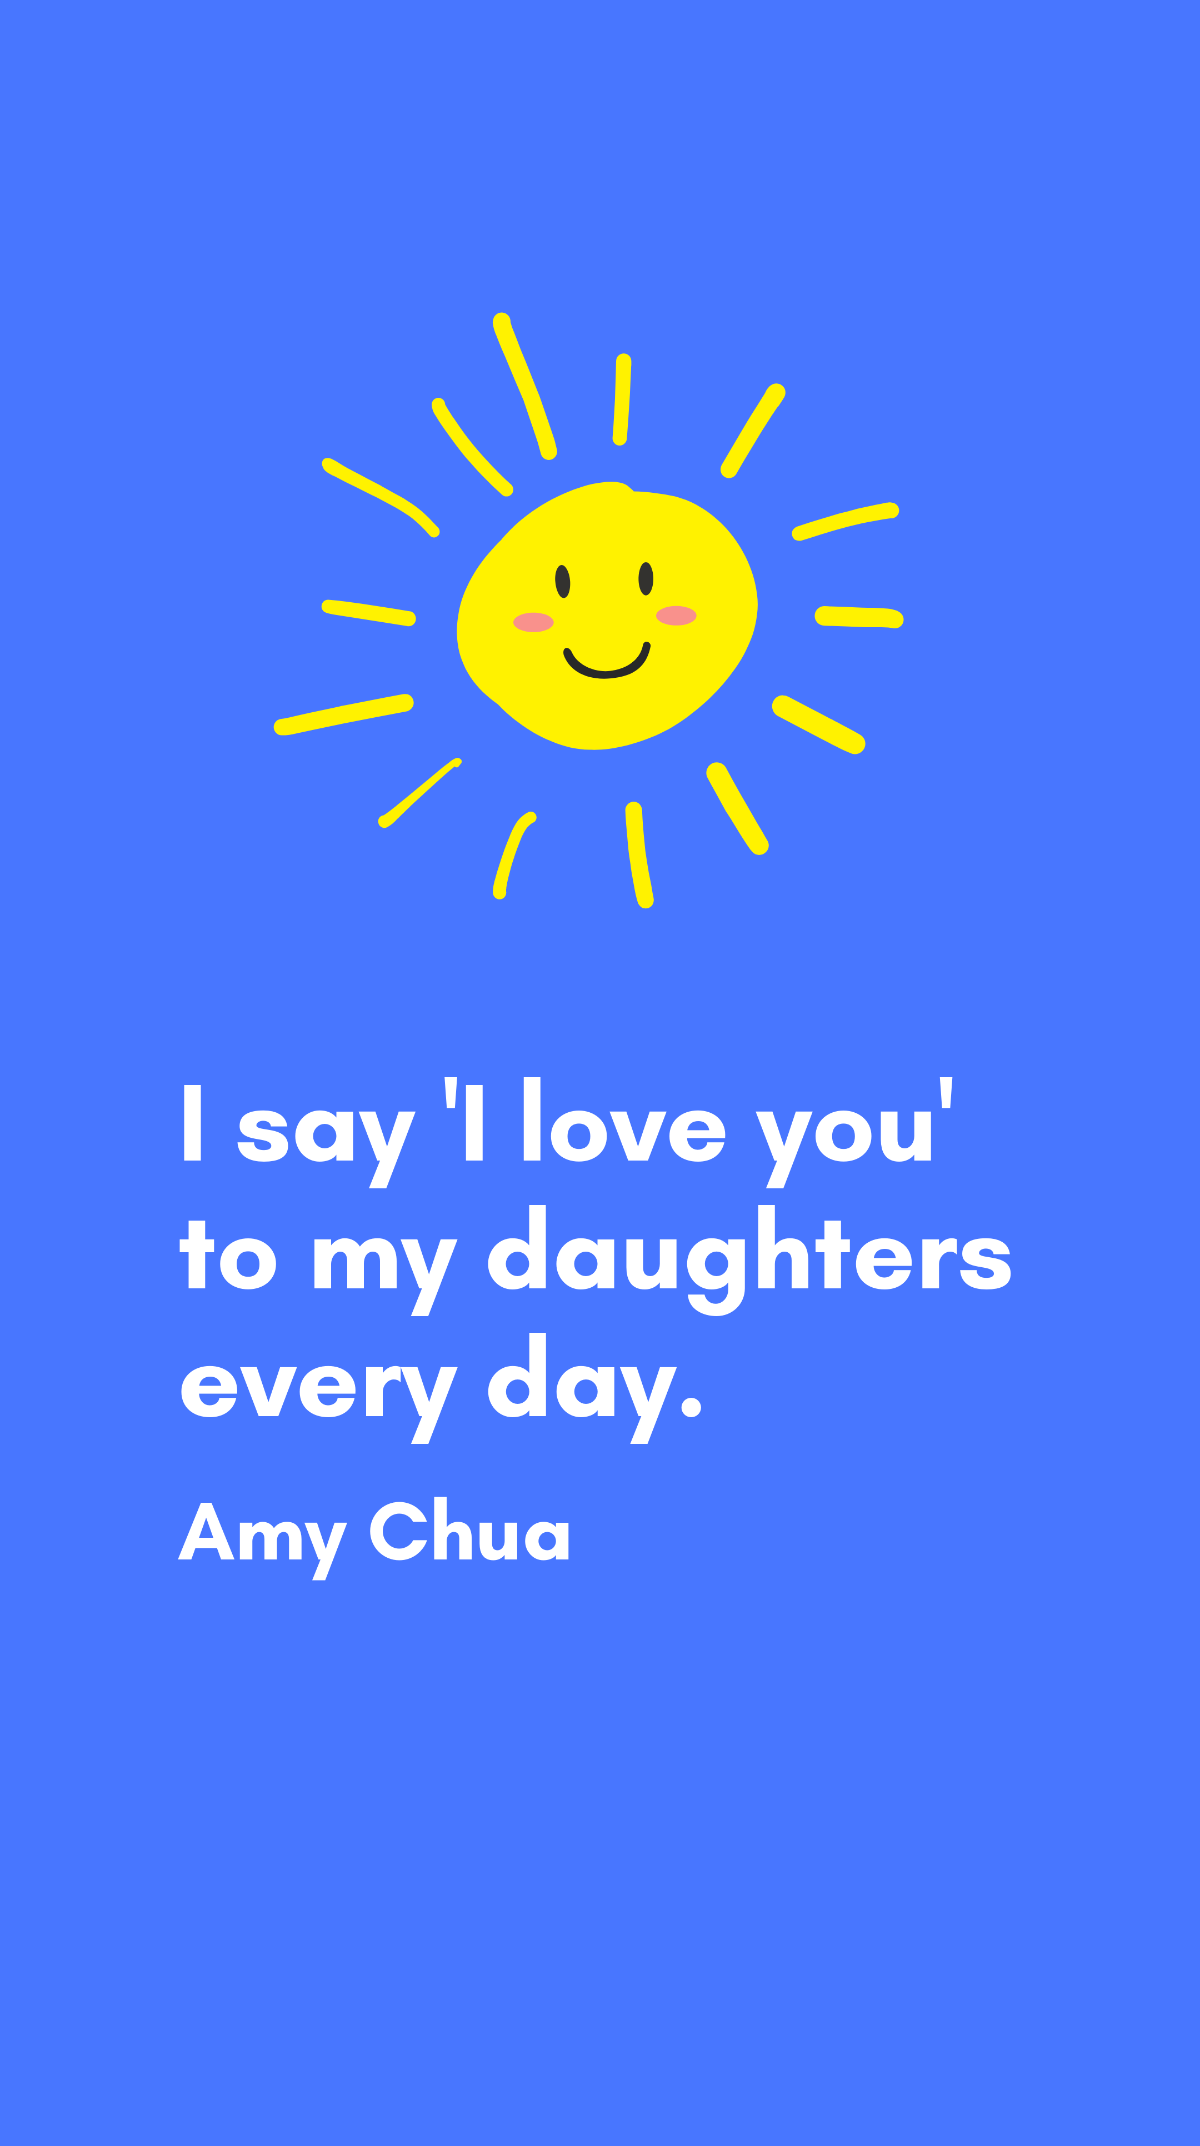 Amy Chua - I say 'I love you' to my daughters every day.